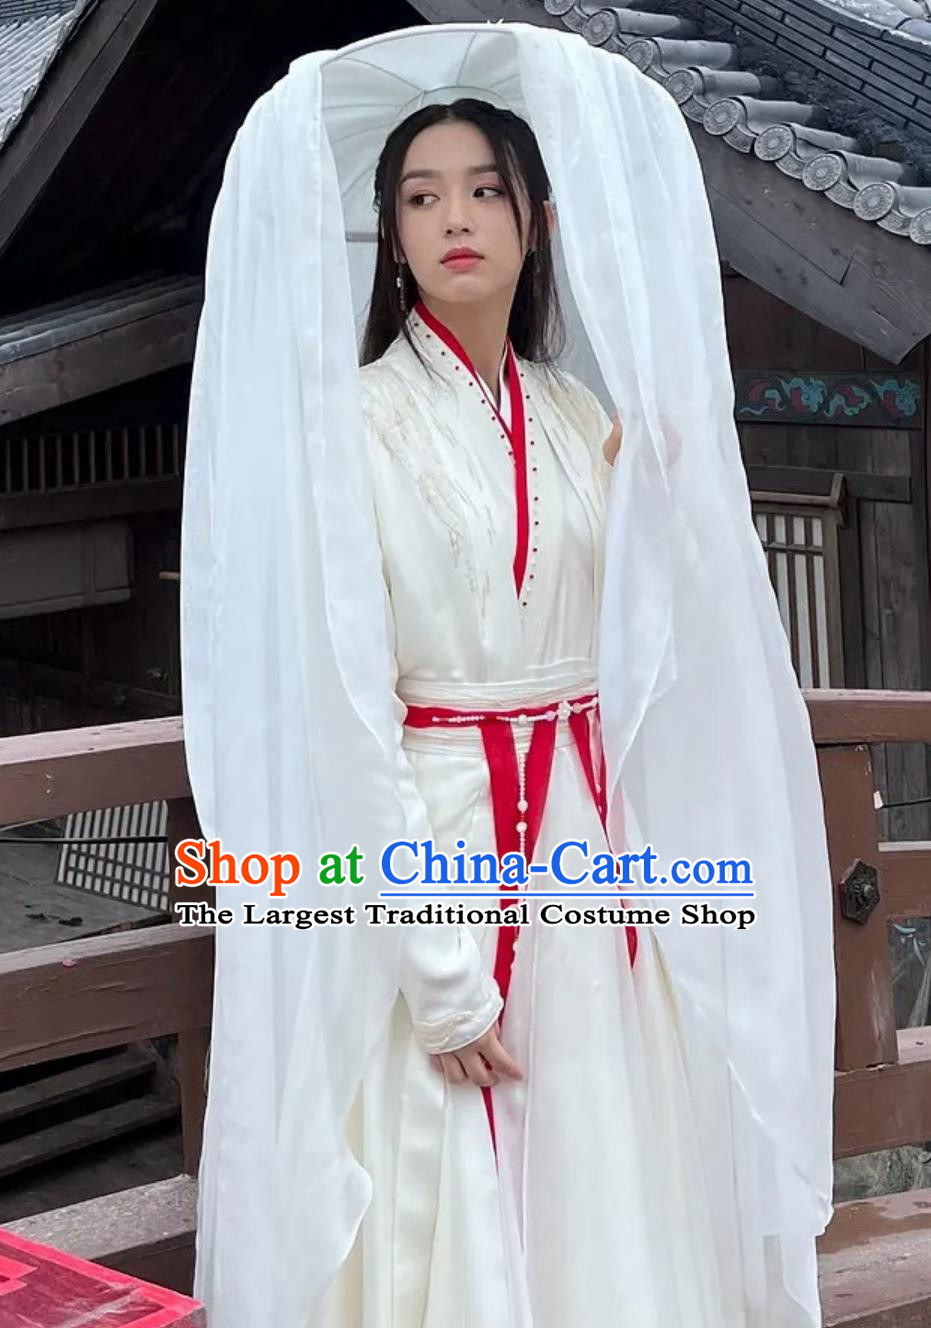 Ancient Chinese Super Heroine Clothing China Traditional Wuxia Costume 2023 TV Series Back From The Brink Swordswoman Yan Hui White Dress